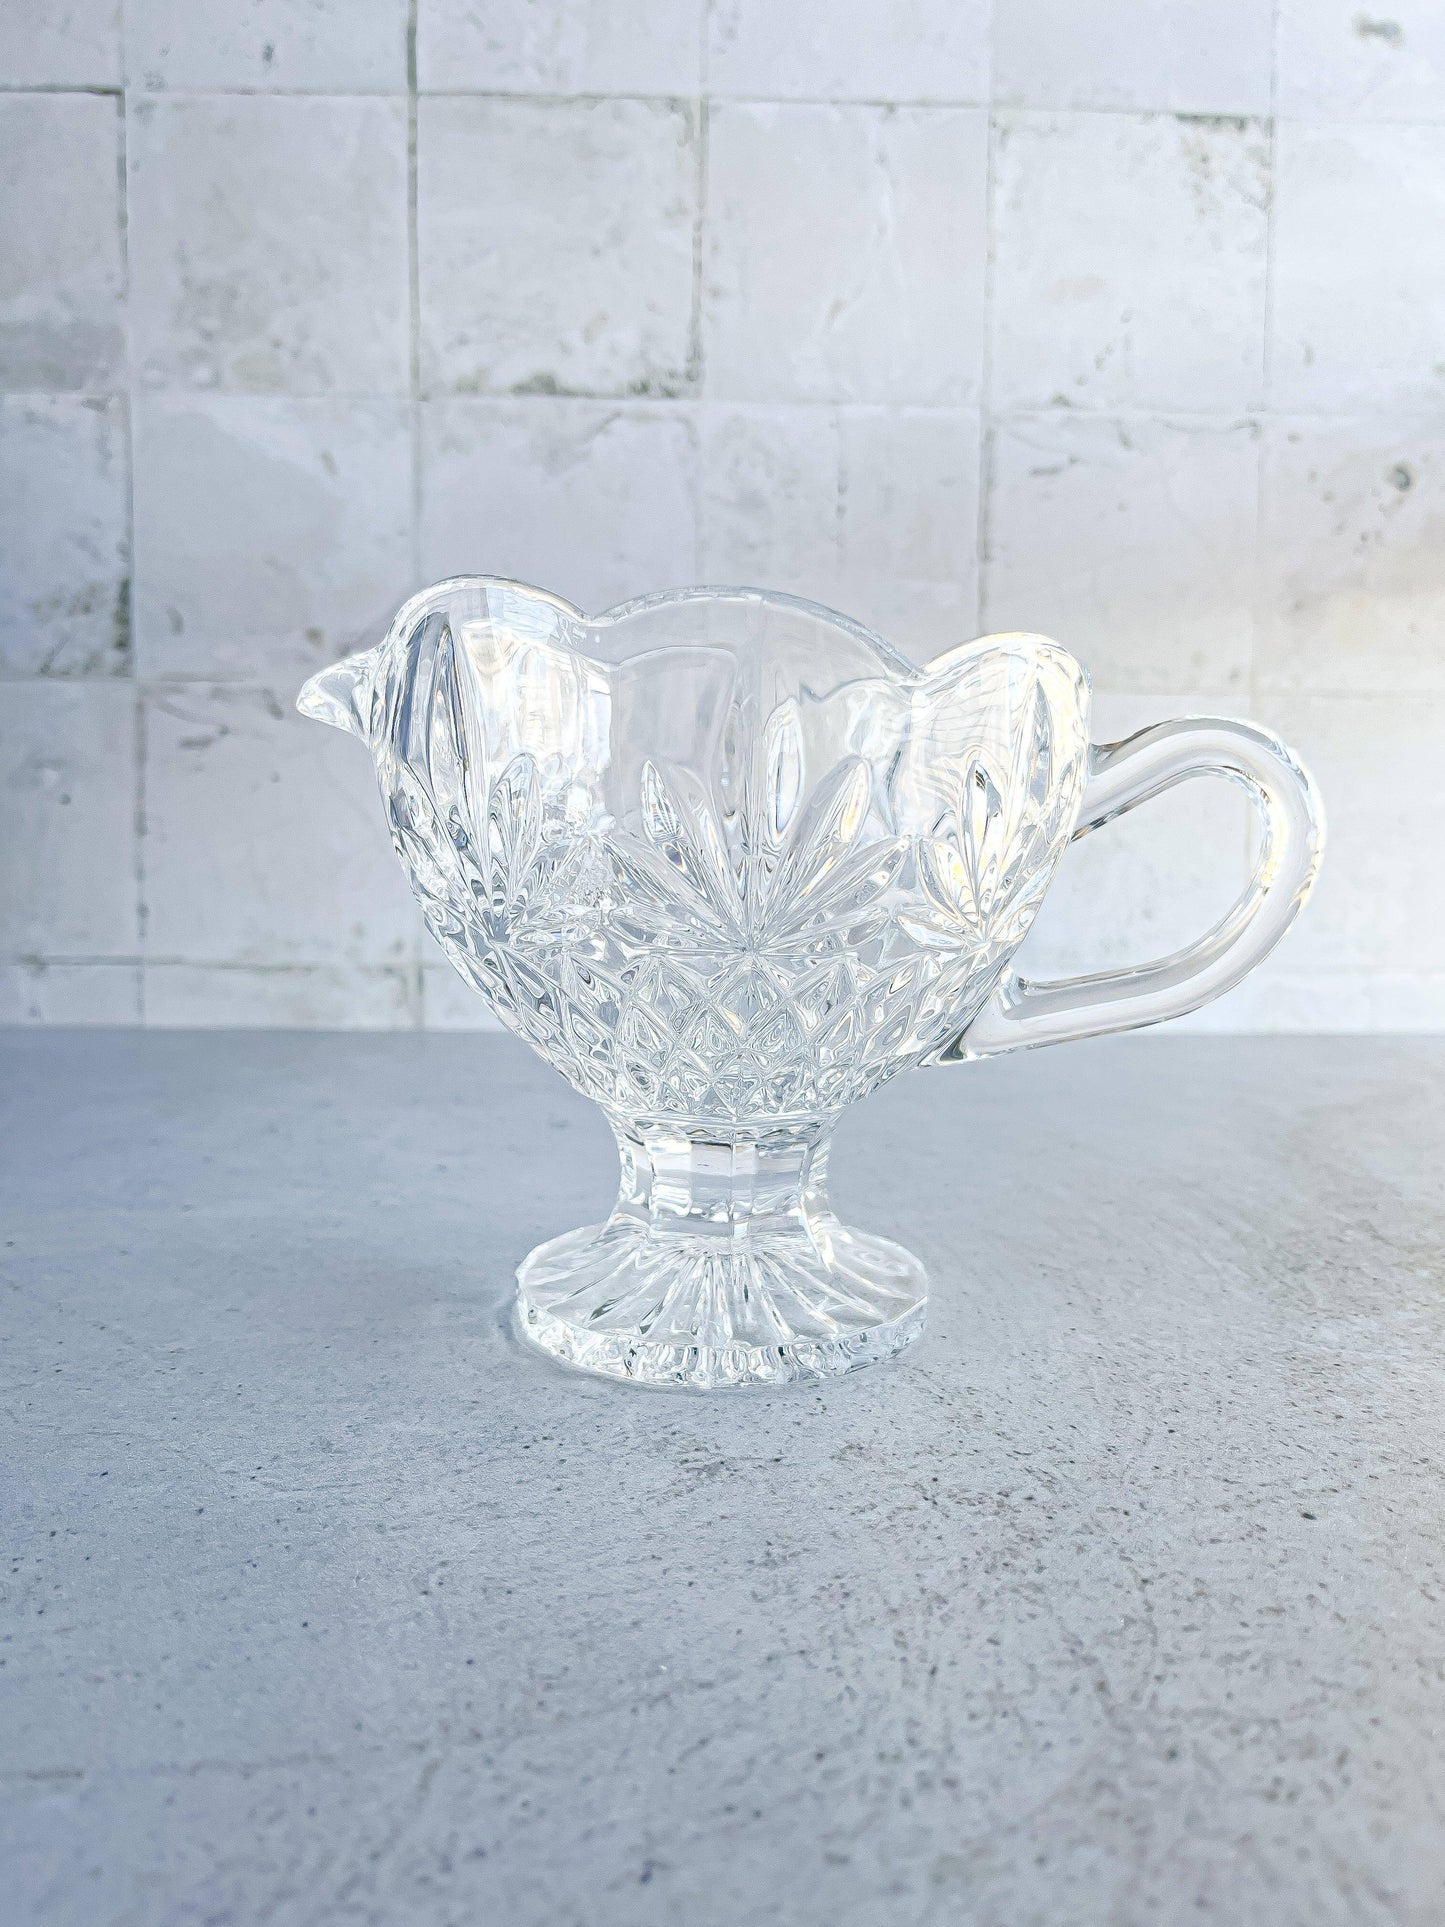 Elegant Curated Collection - Silver-Plated Elegance and Glass Accents - SOSC Home